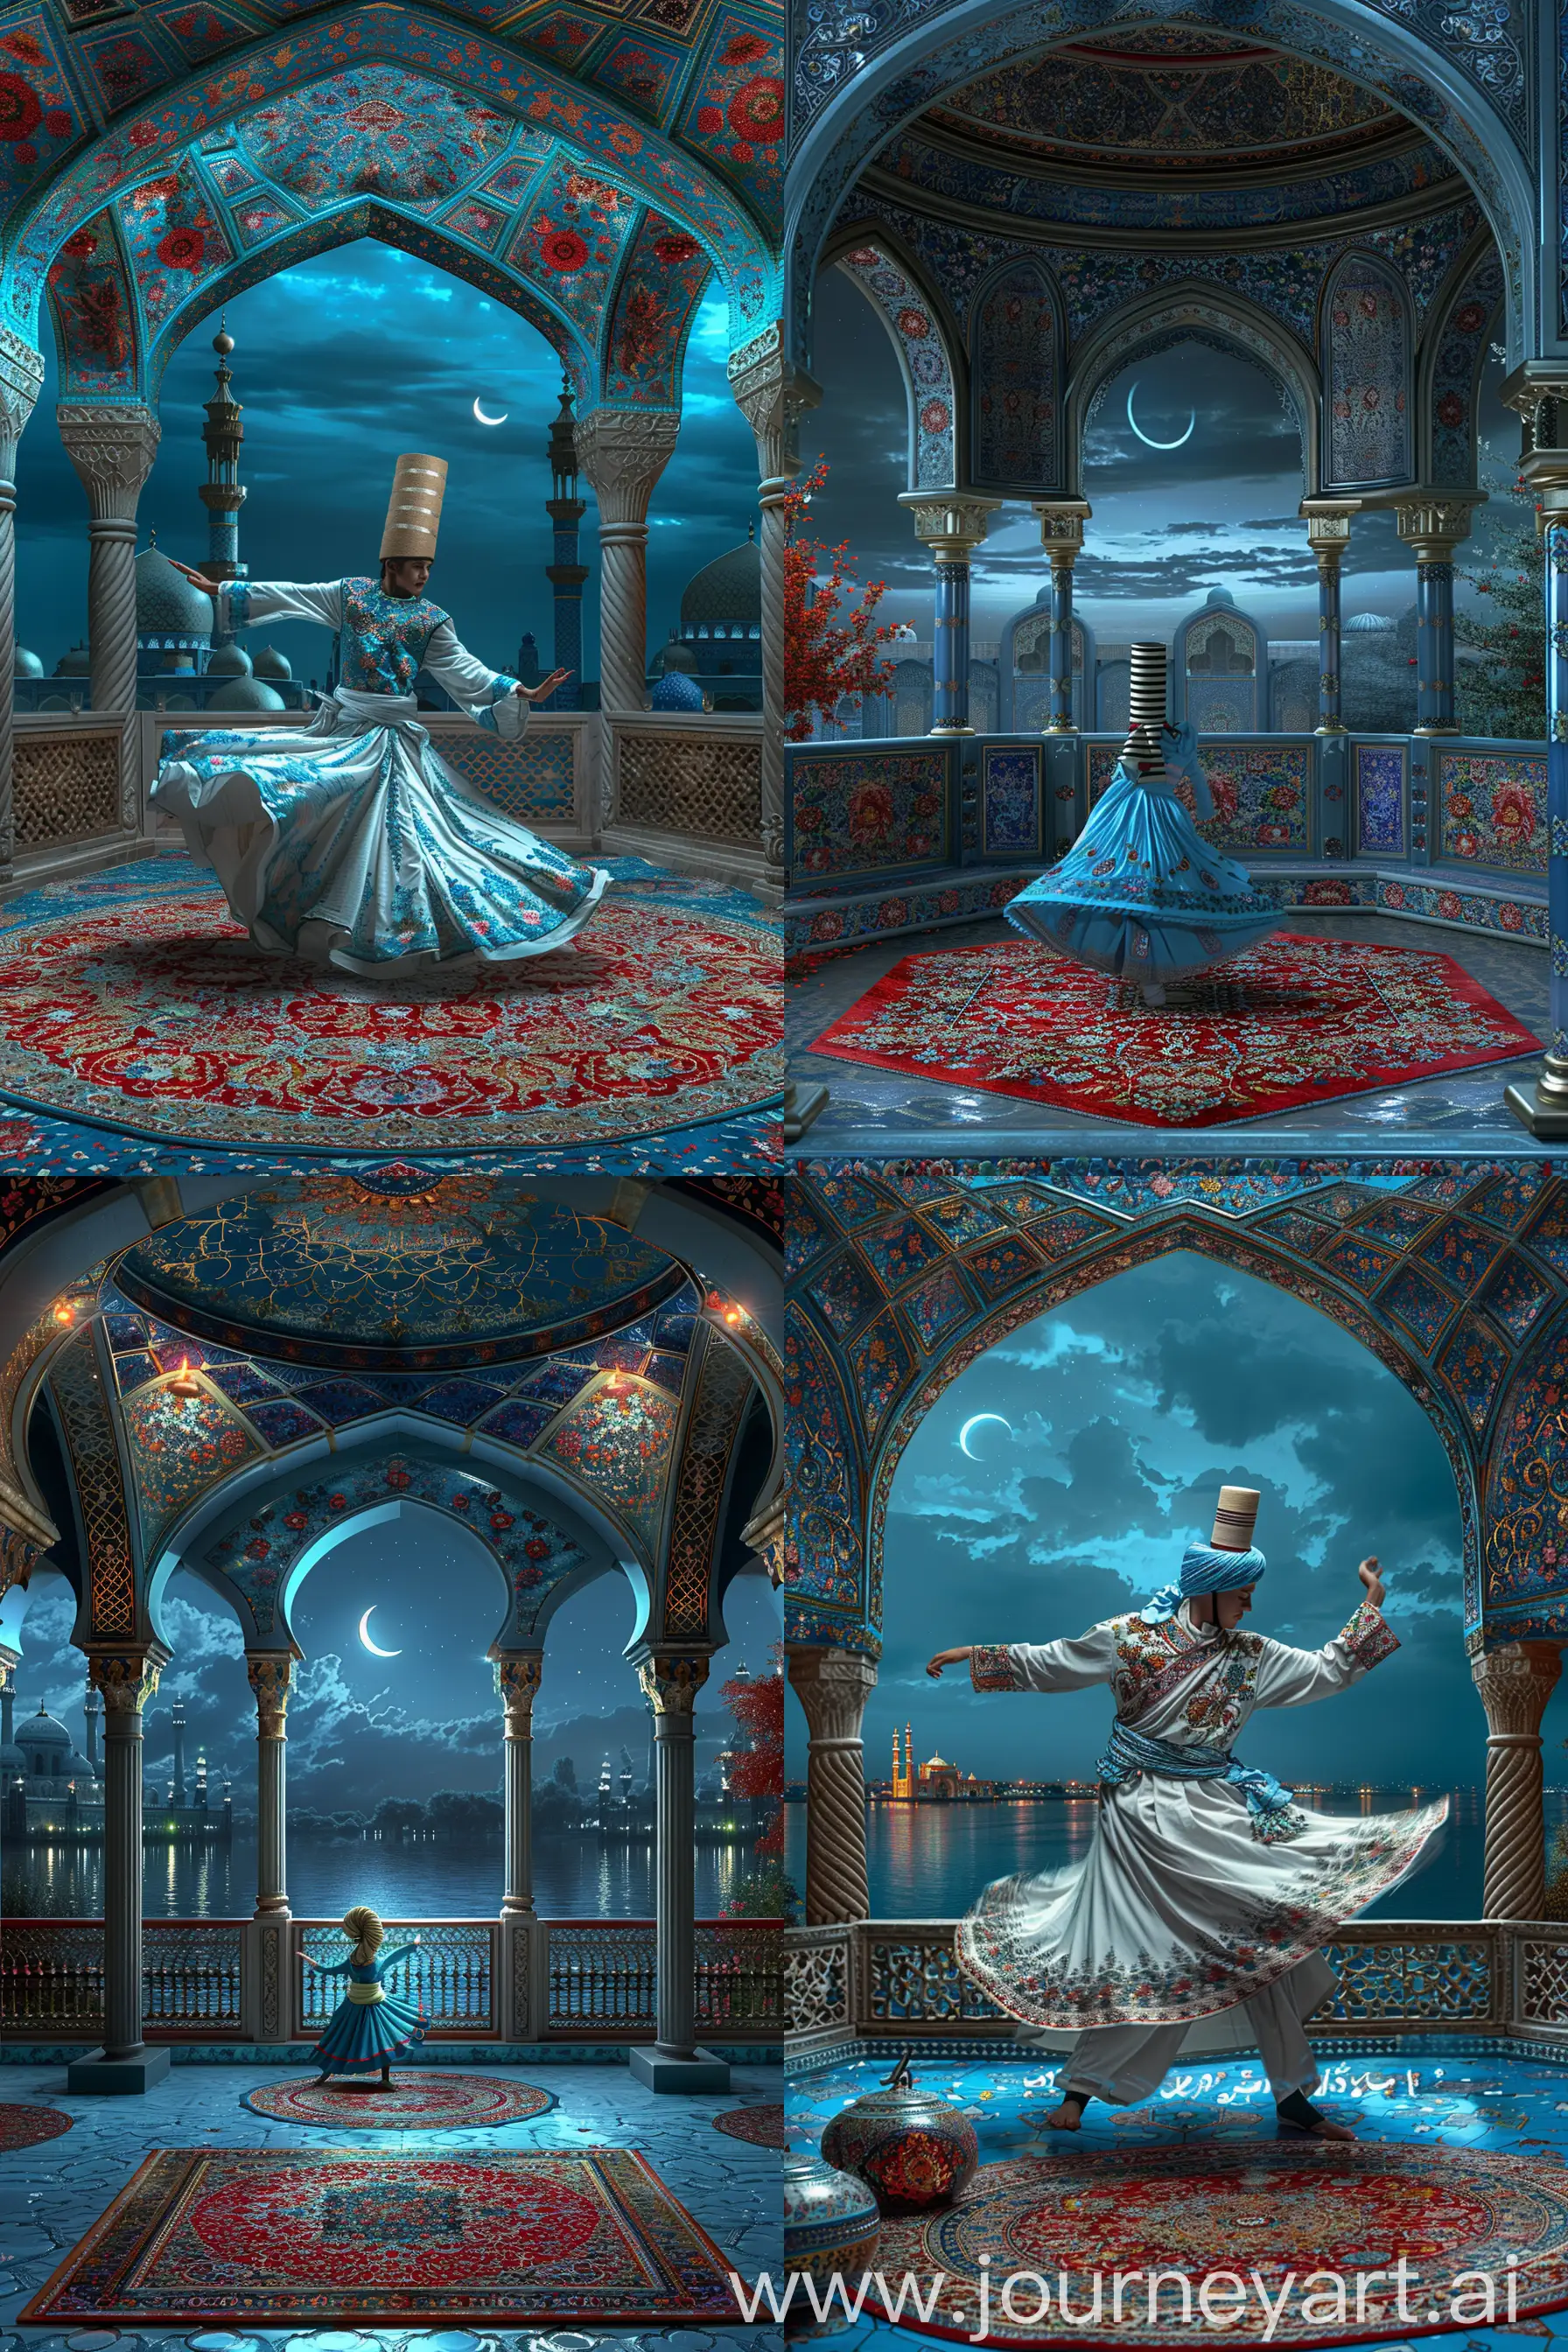 British-Dervish-Performing-Sufi-Whirling-Dance-on-Persian-Carpet-in-Ornate-Balcony